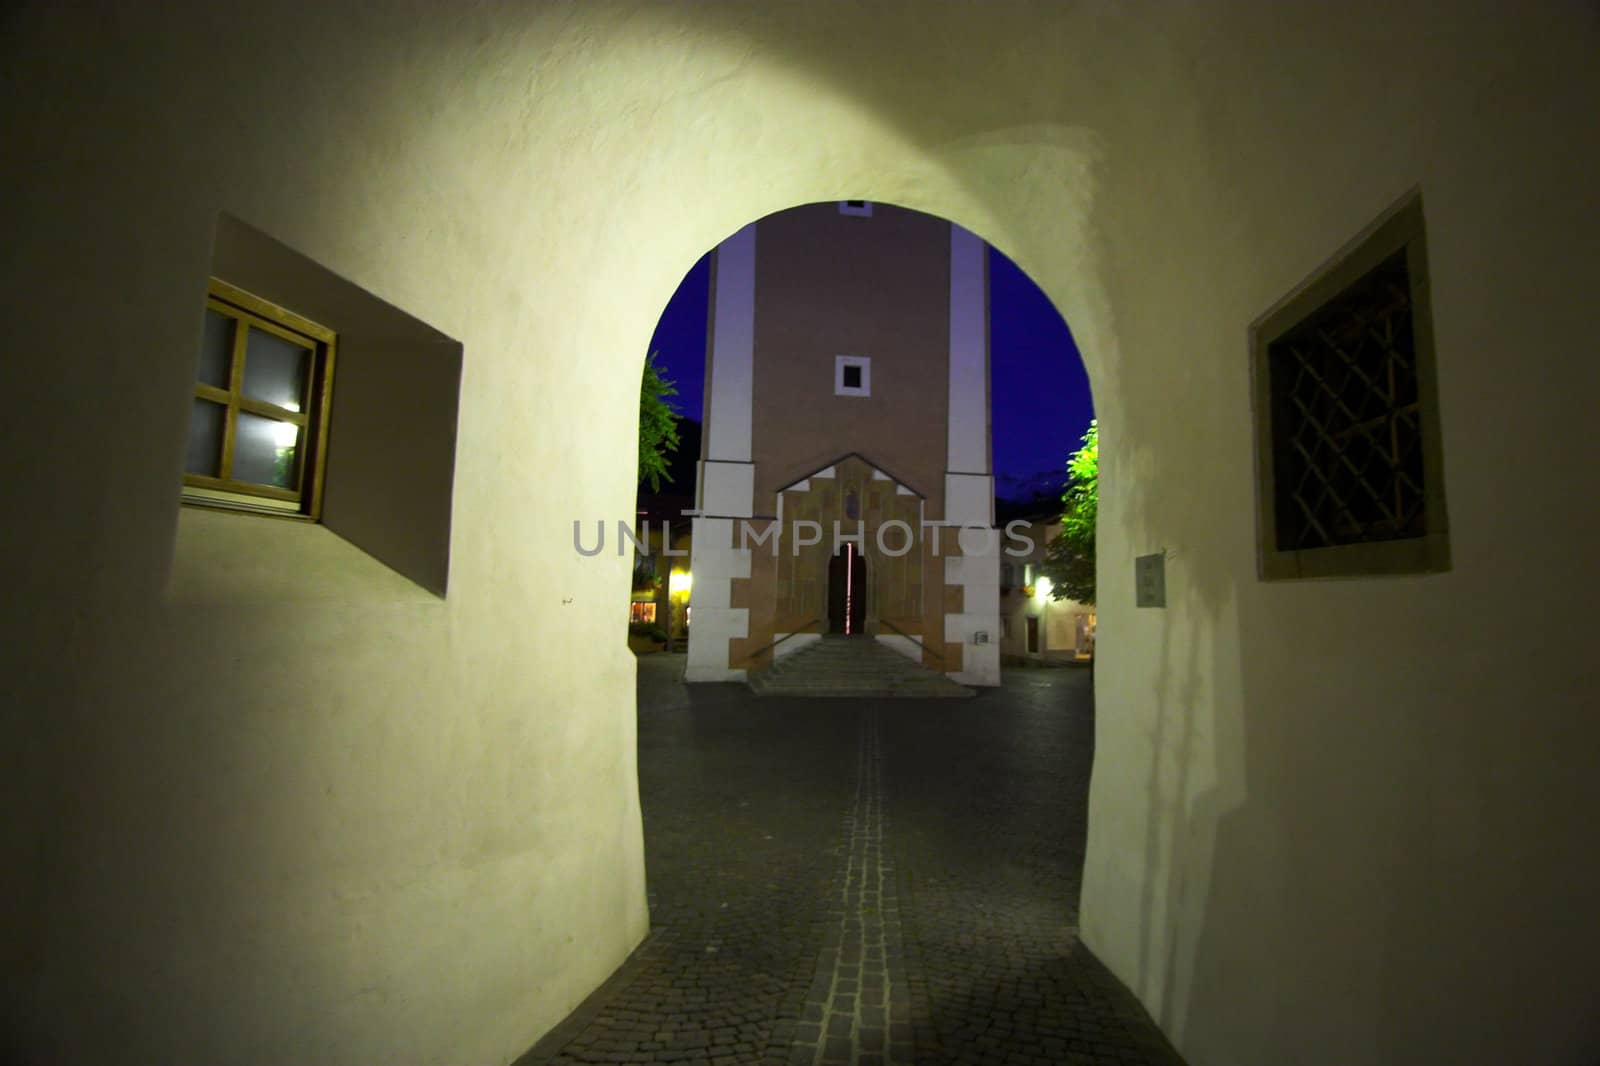 Church and passage under building at night